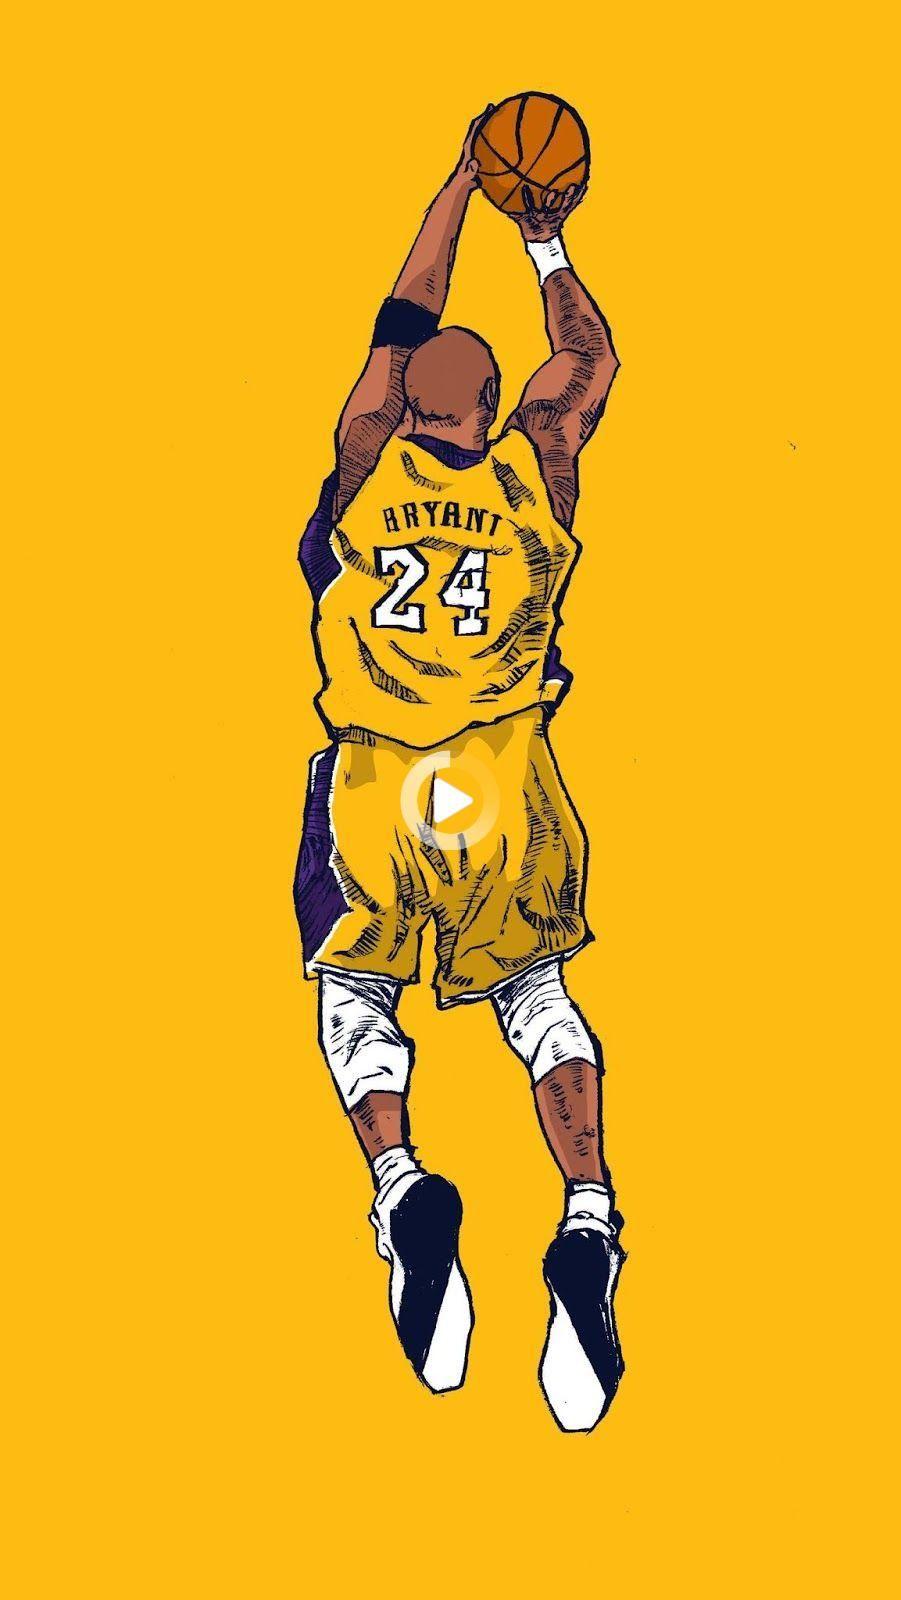 HoopsWallpaperscom  Get the latest HD and mobile NBA wallpapers today   Blog Archive NEW Kobe Bryant Tribute wallpaper  HoopsWallpaperscom  Get  the latest HD and mobile NBA wallpapers today